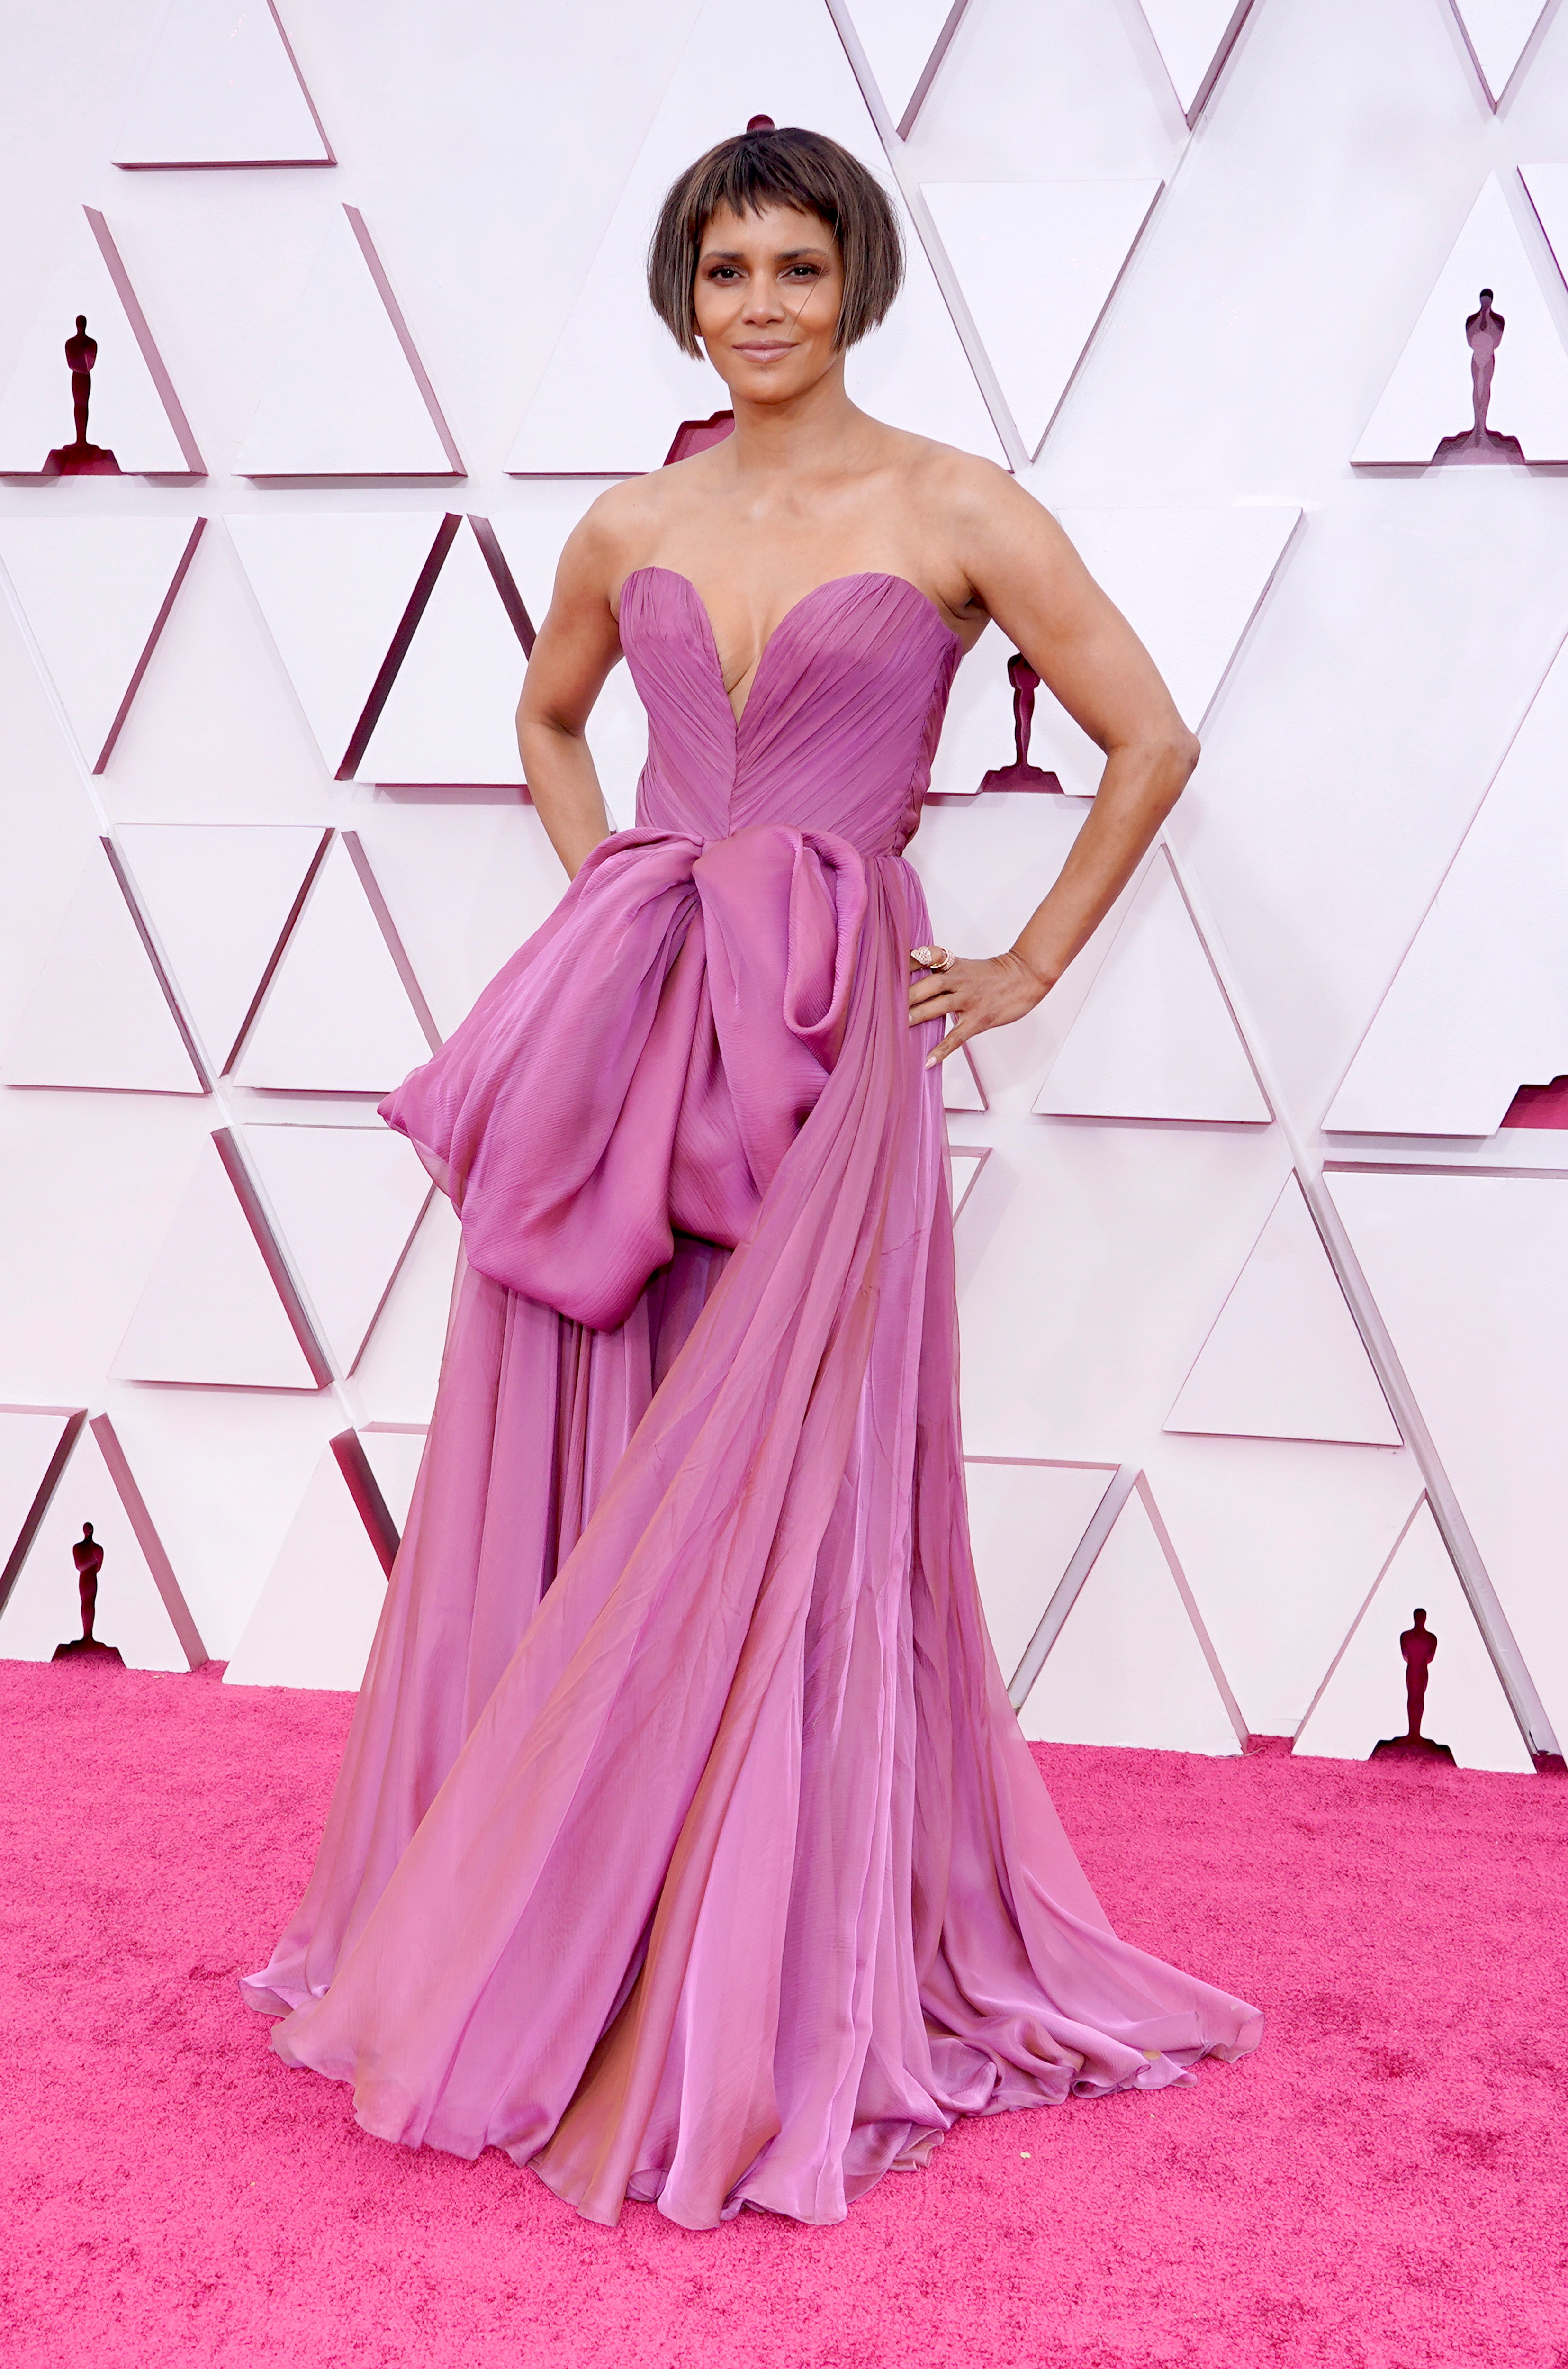 Halle Berry on the Oscars red carpet wearing Dolce & Gabbana